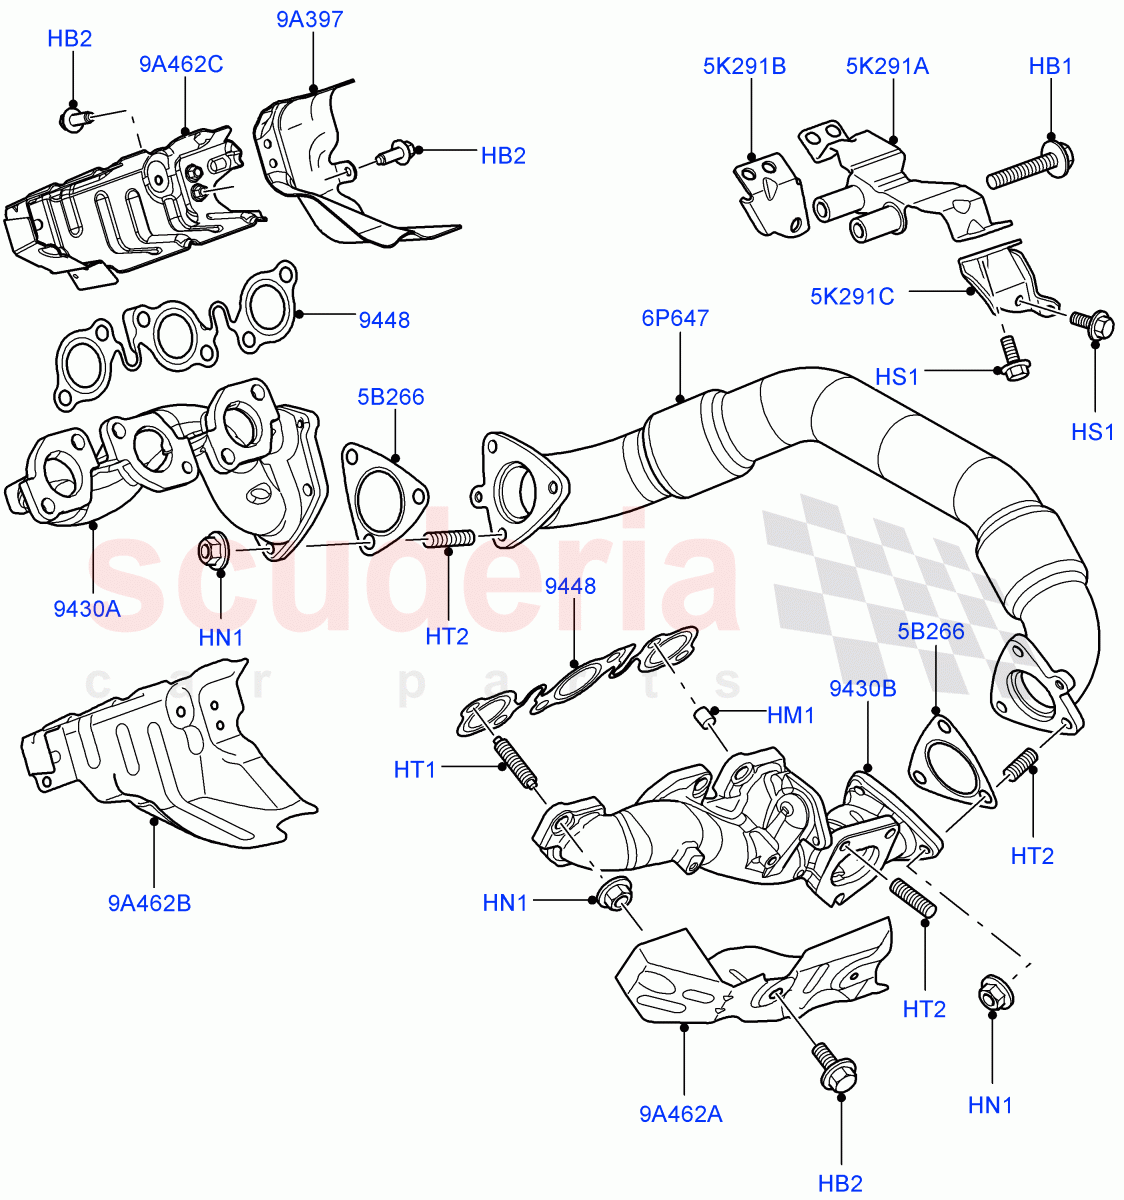 Exhaust Manifold(Lion Diesel 2.7 V6 (140KW))((V)TO9A999999) of Land Rover Land Rover Range Rover Sport (2005-2009) [2.7 Diesel V6]